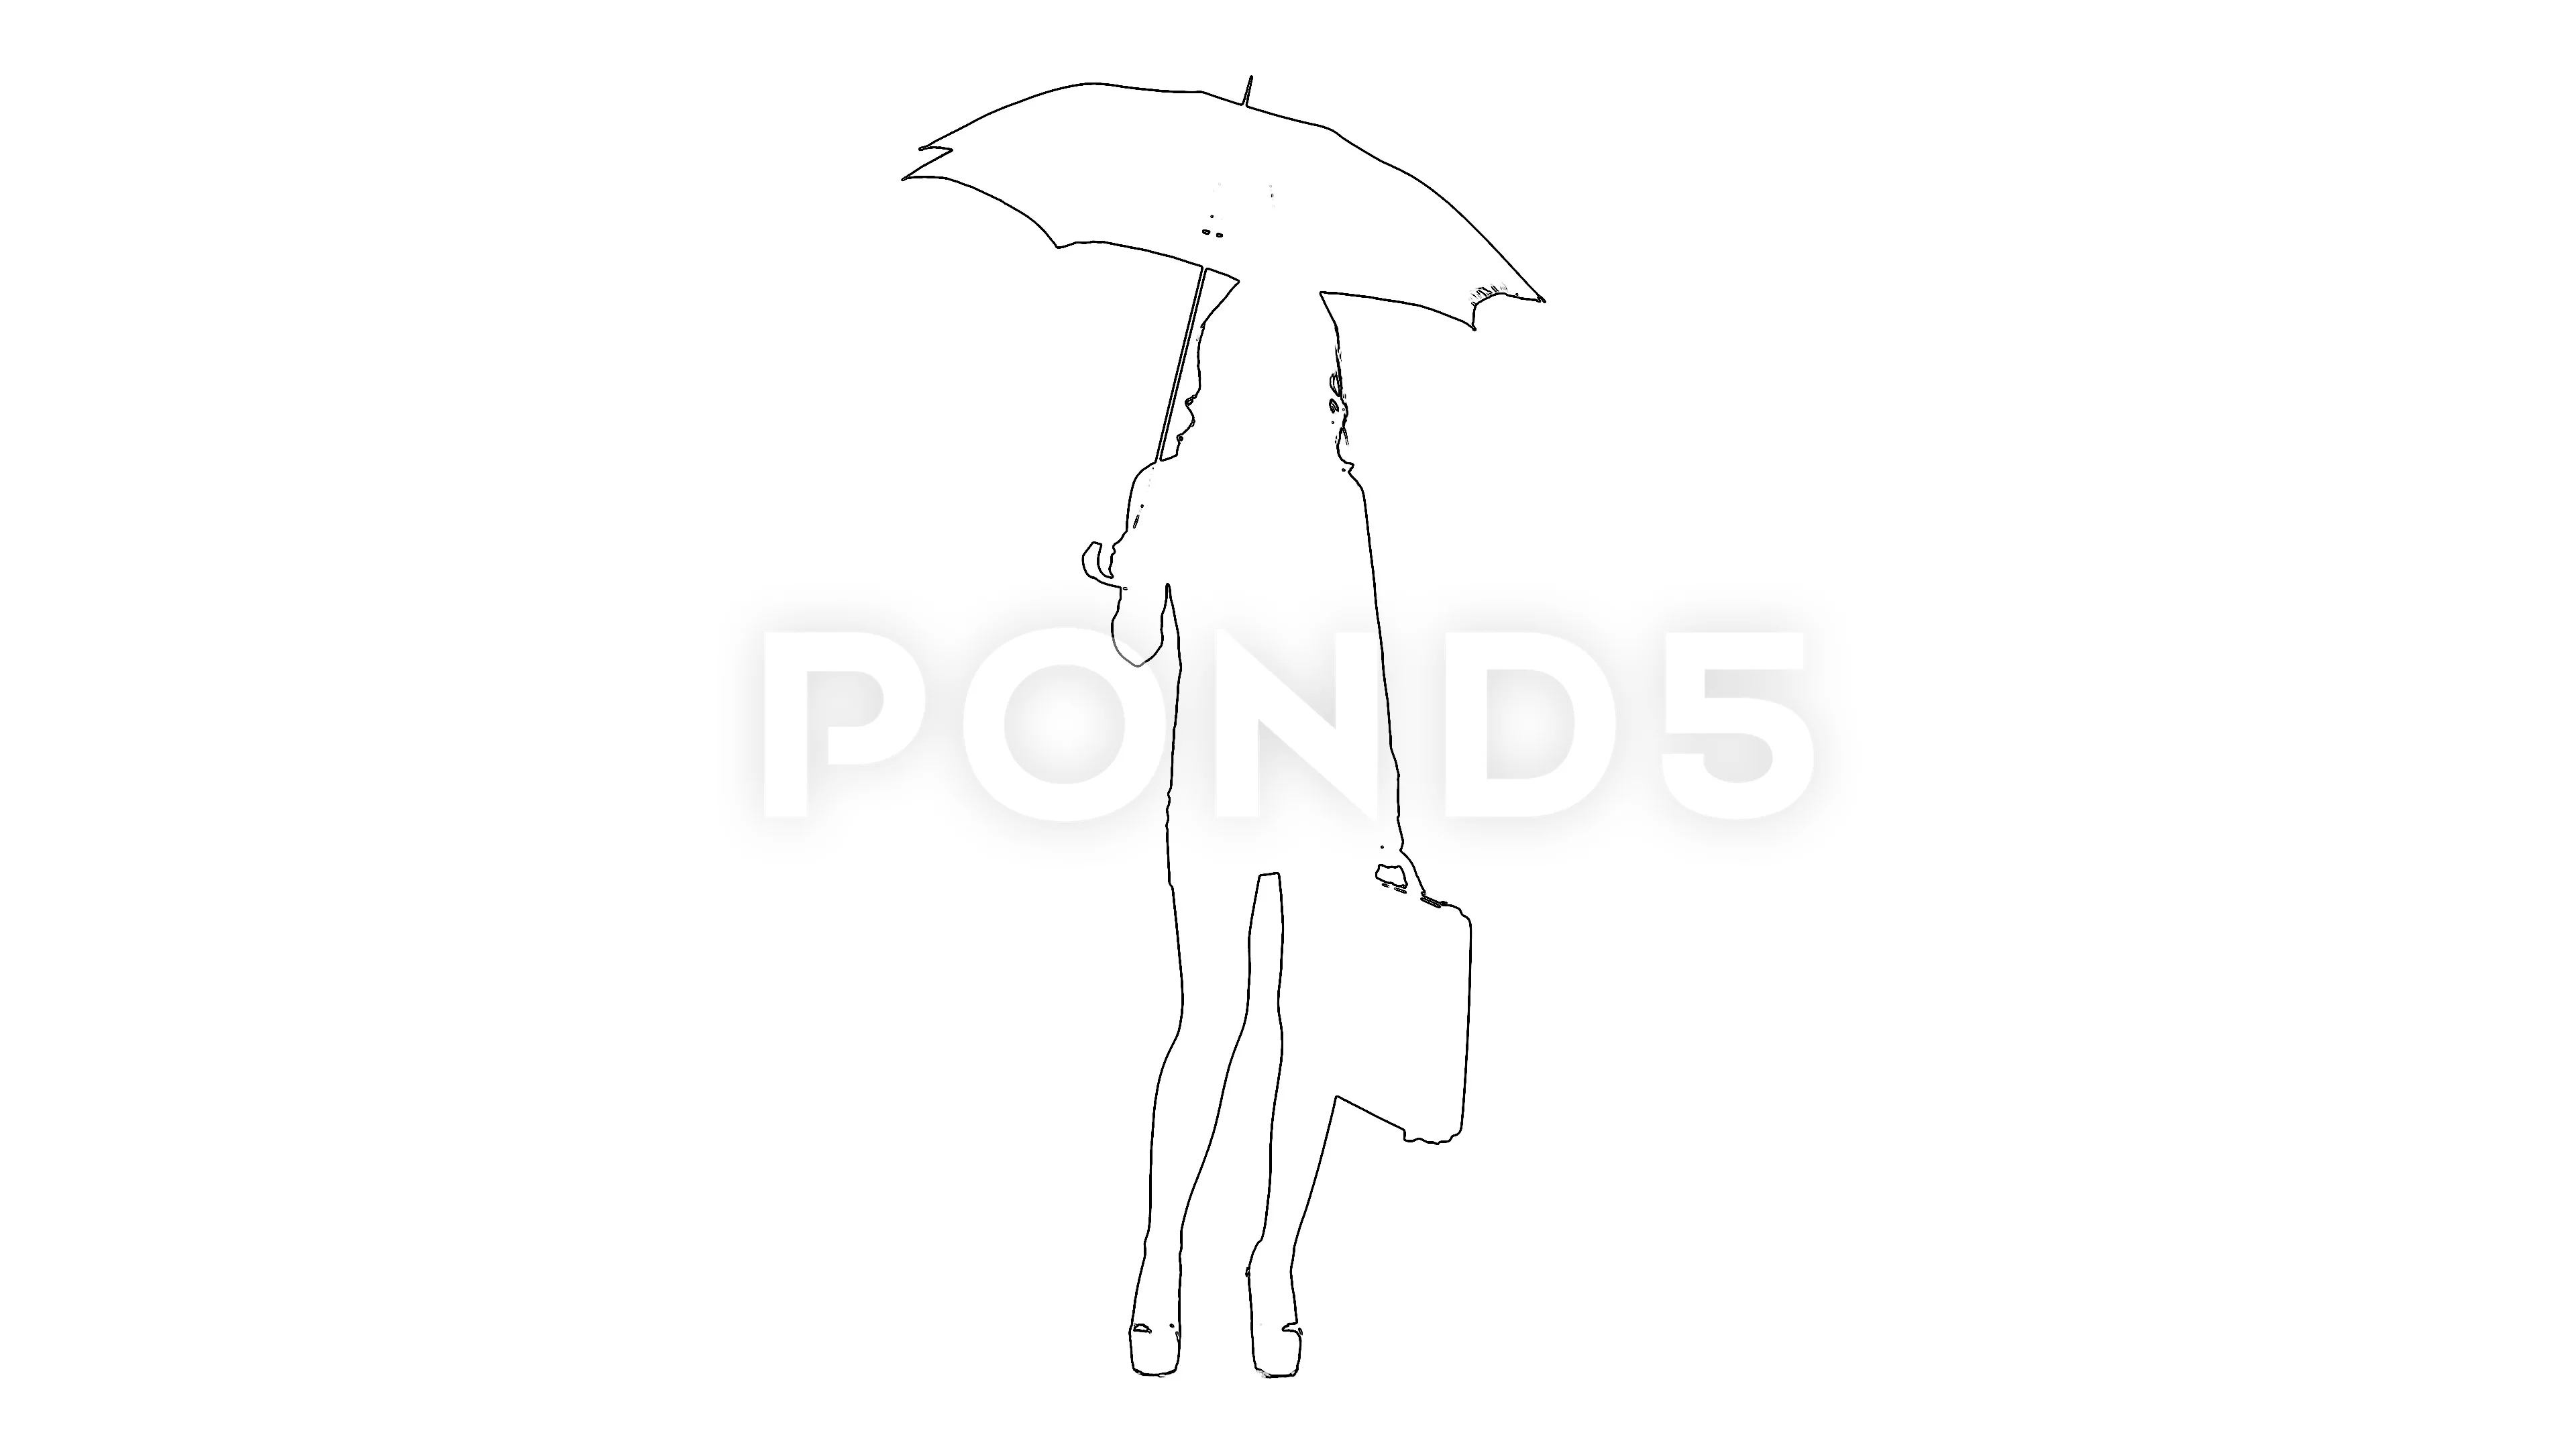 Easy How to Draw an Umbrella Tutorial Video and Coloring Page